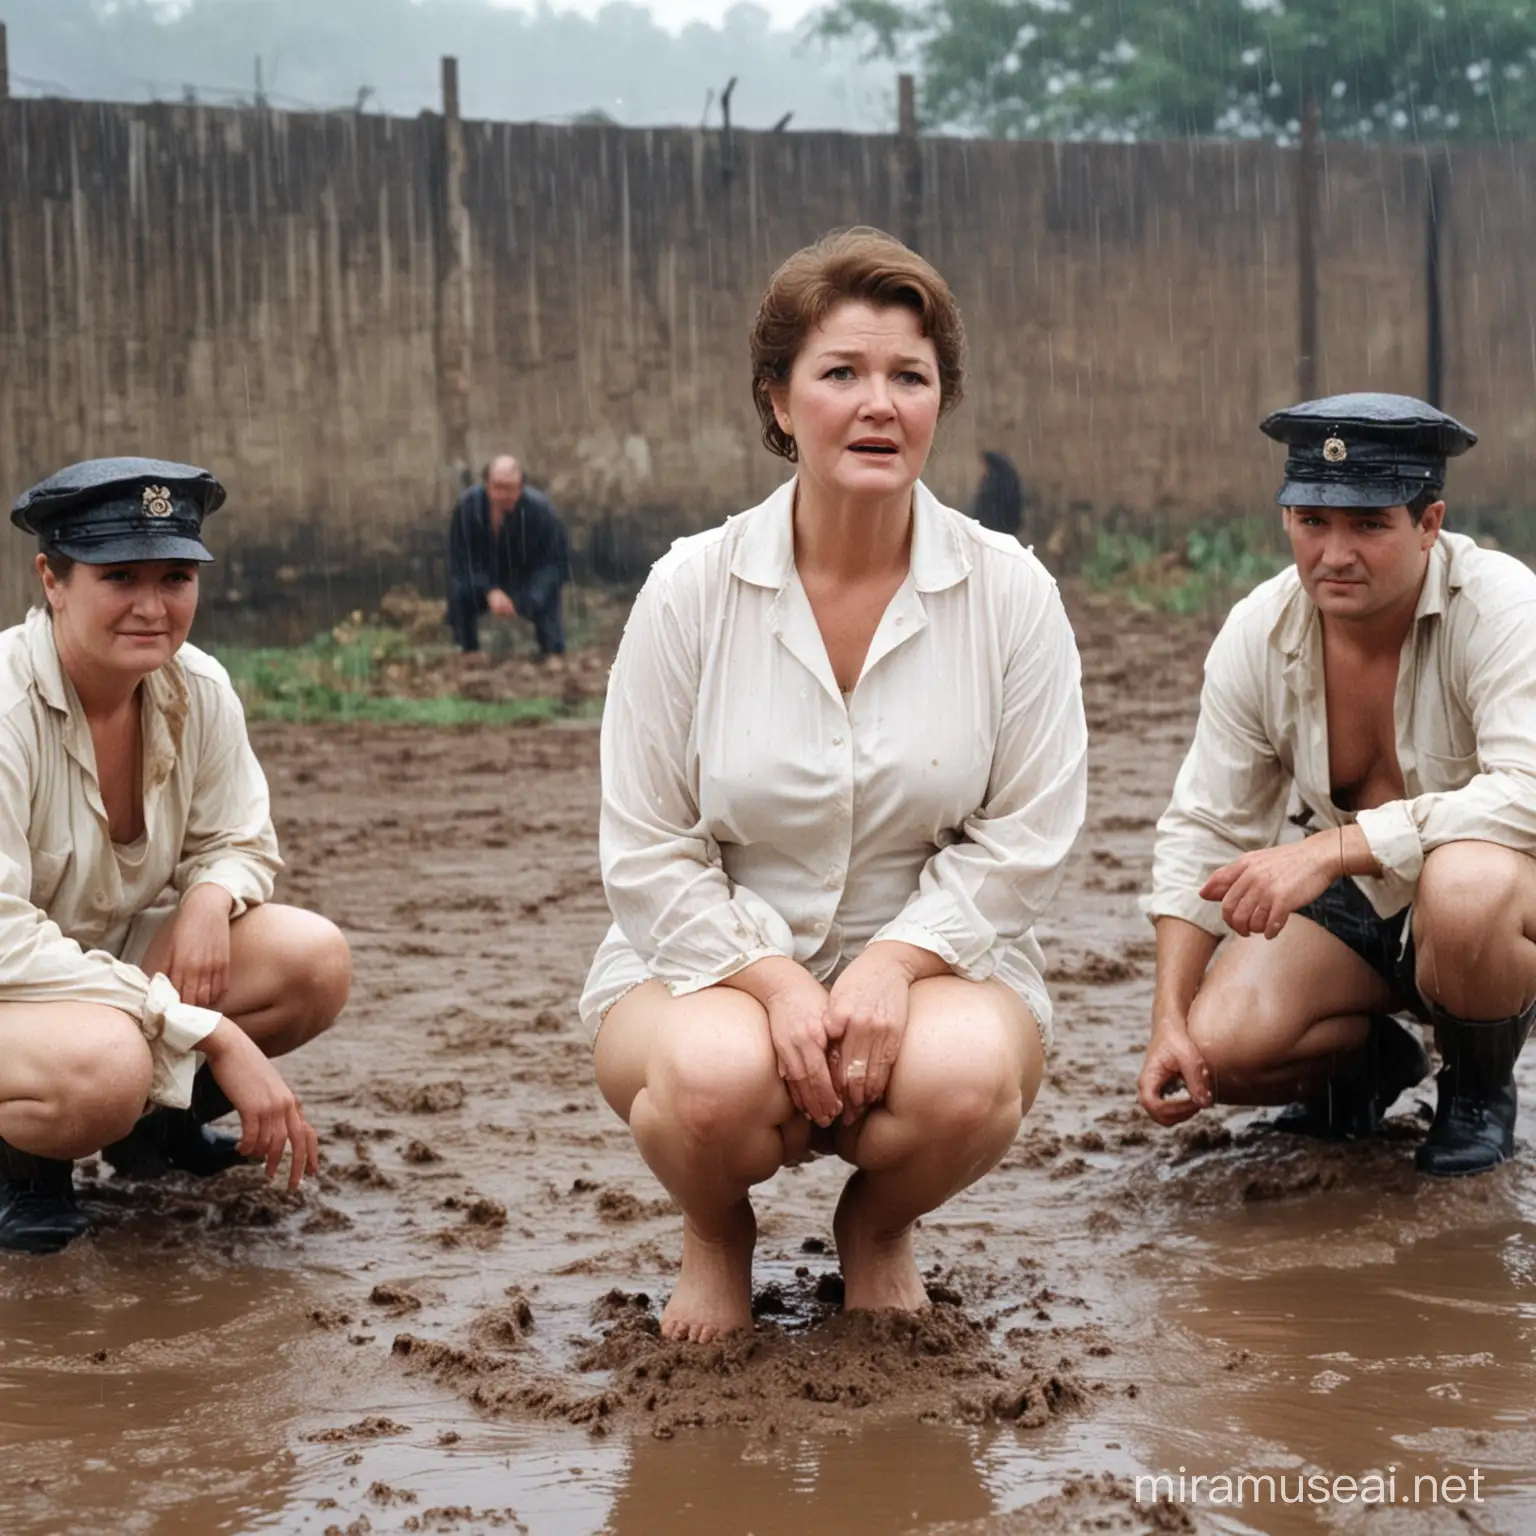 Patricia Routledge Squatting in Muddy Prison Camp Rainy Day Watched by Guards